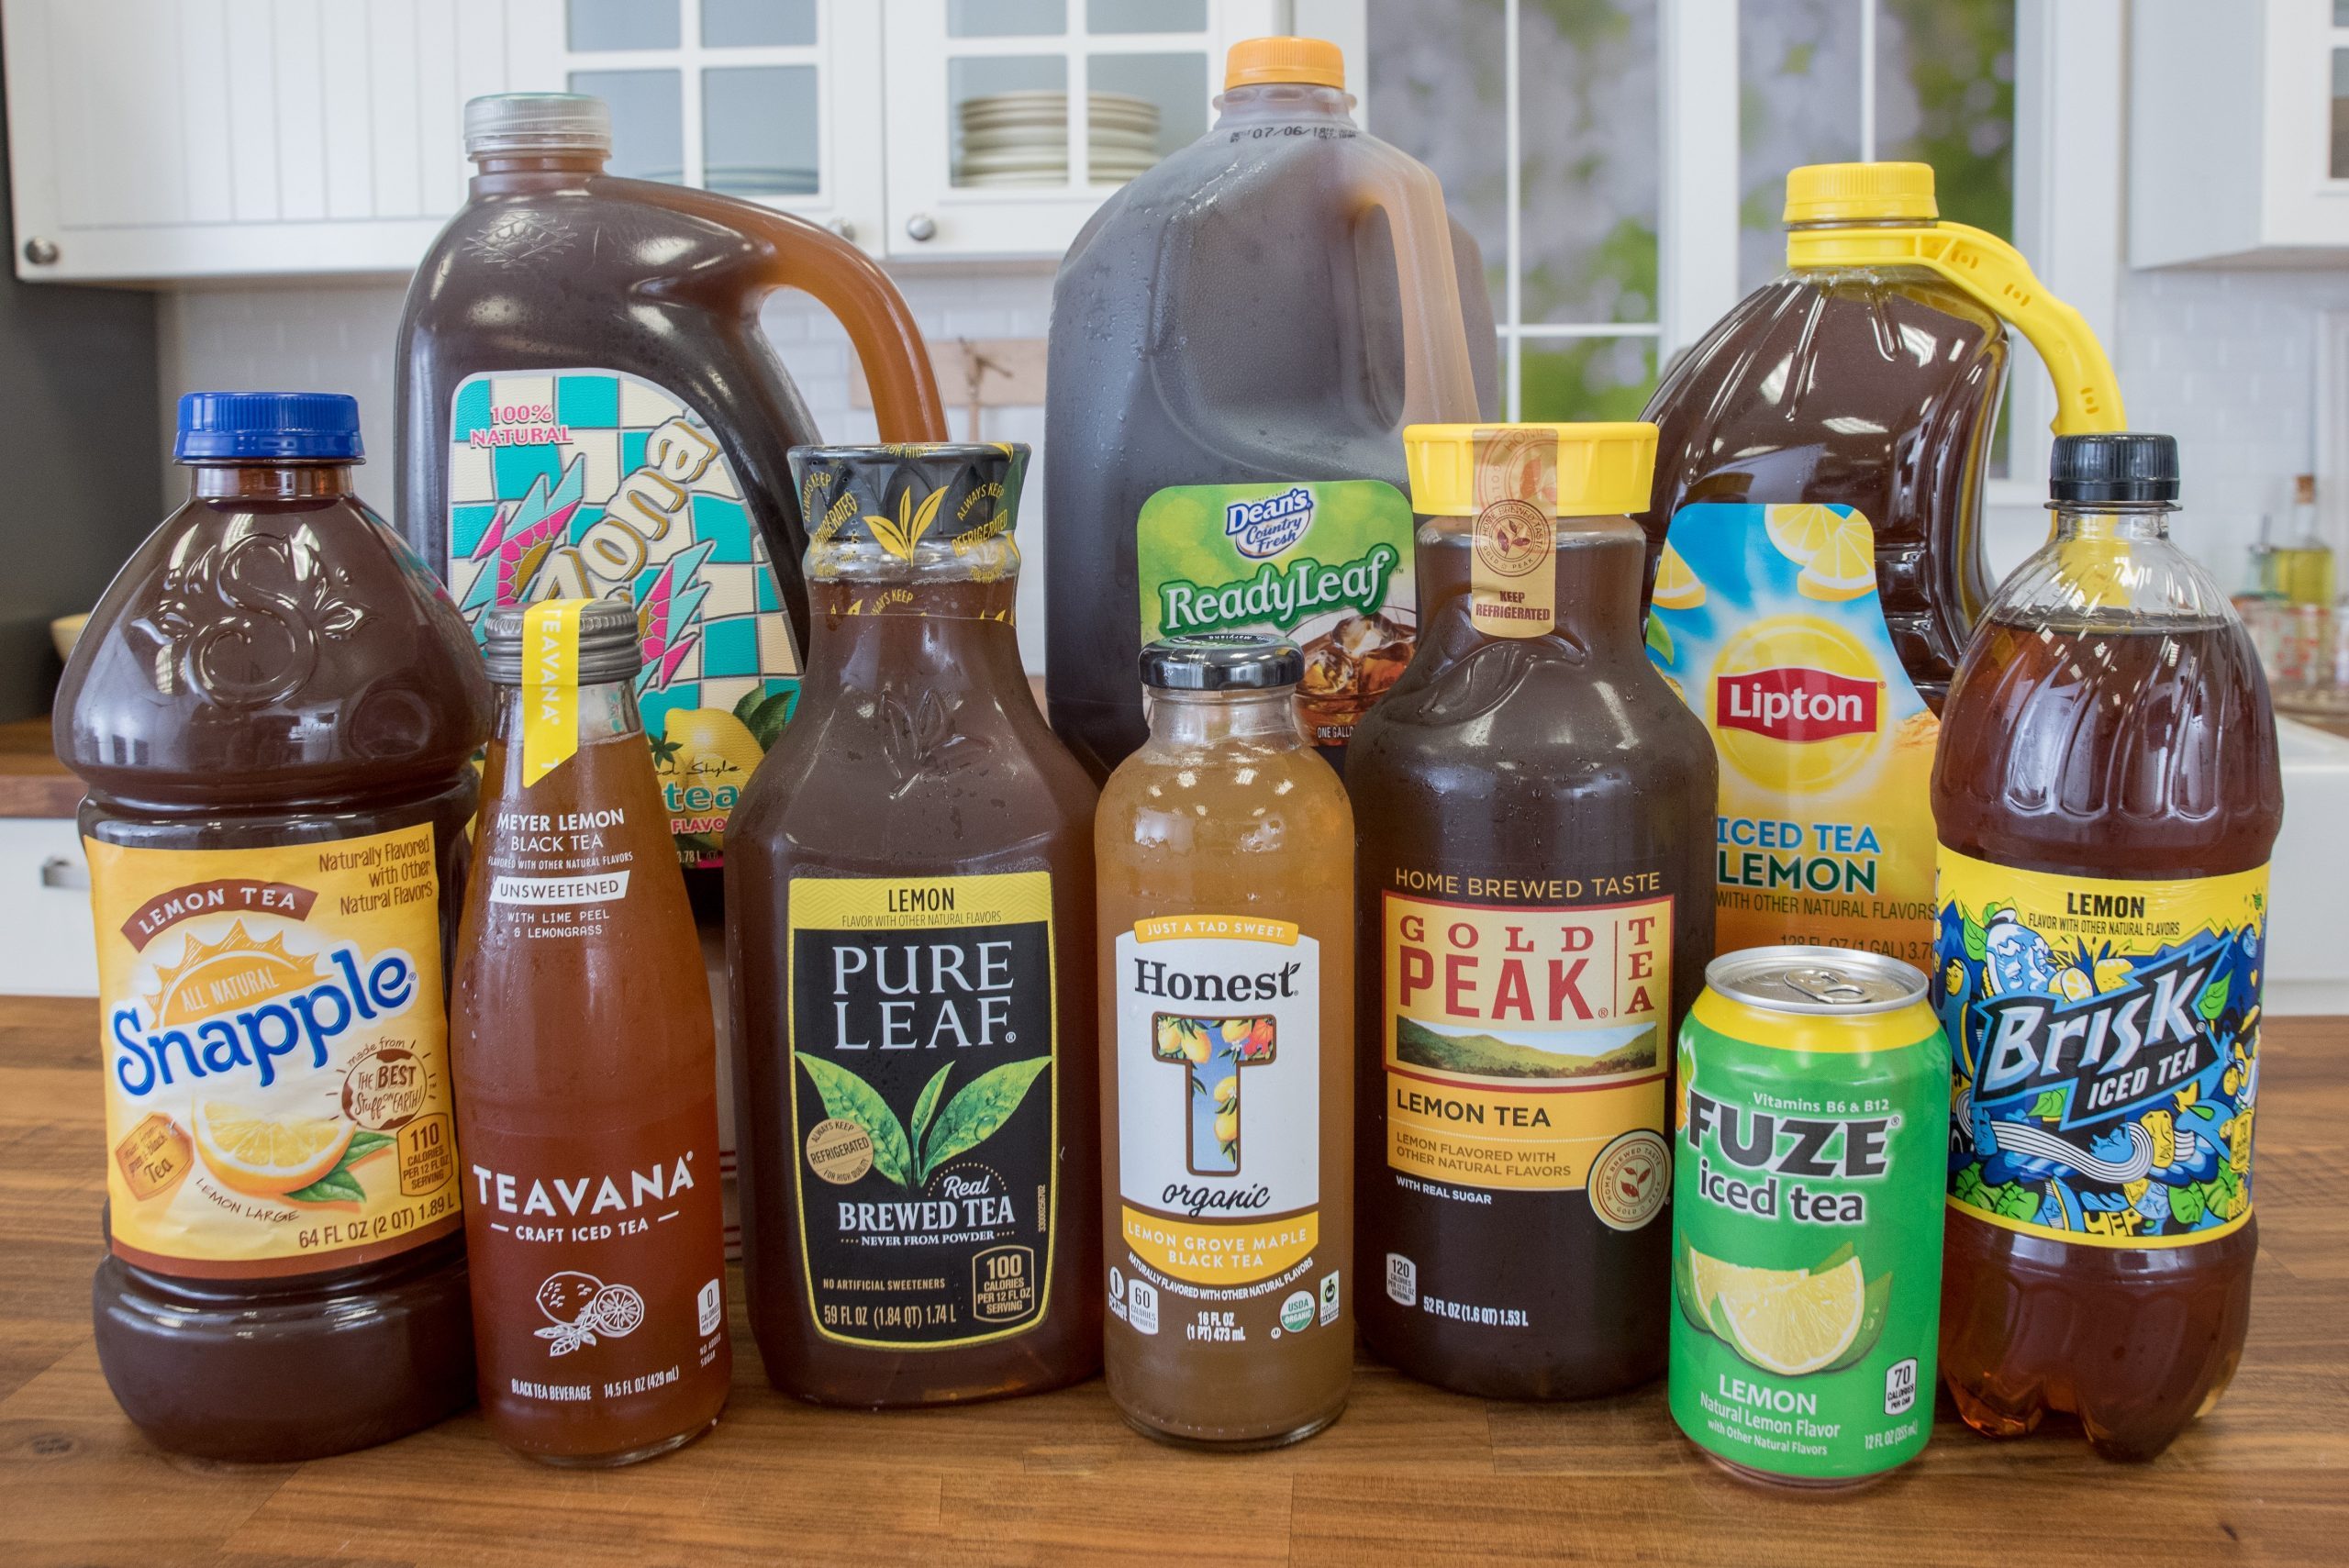 The Best Iced Tea Brand, According to a Taste Test